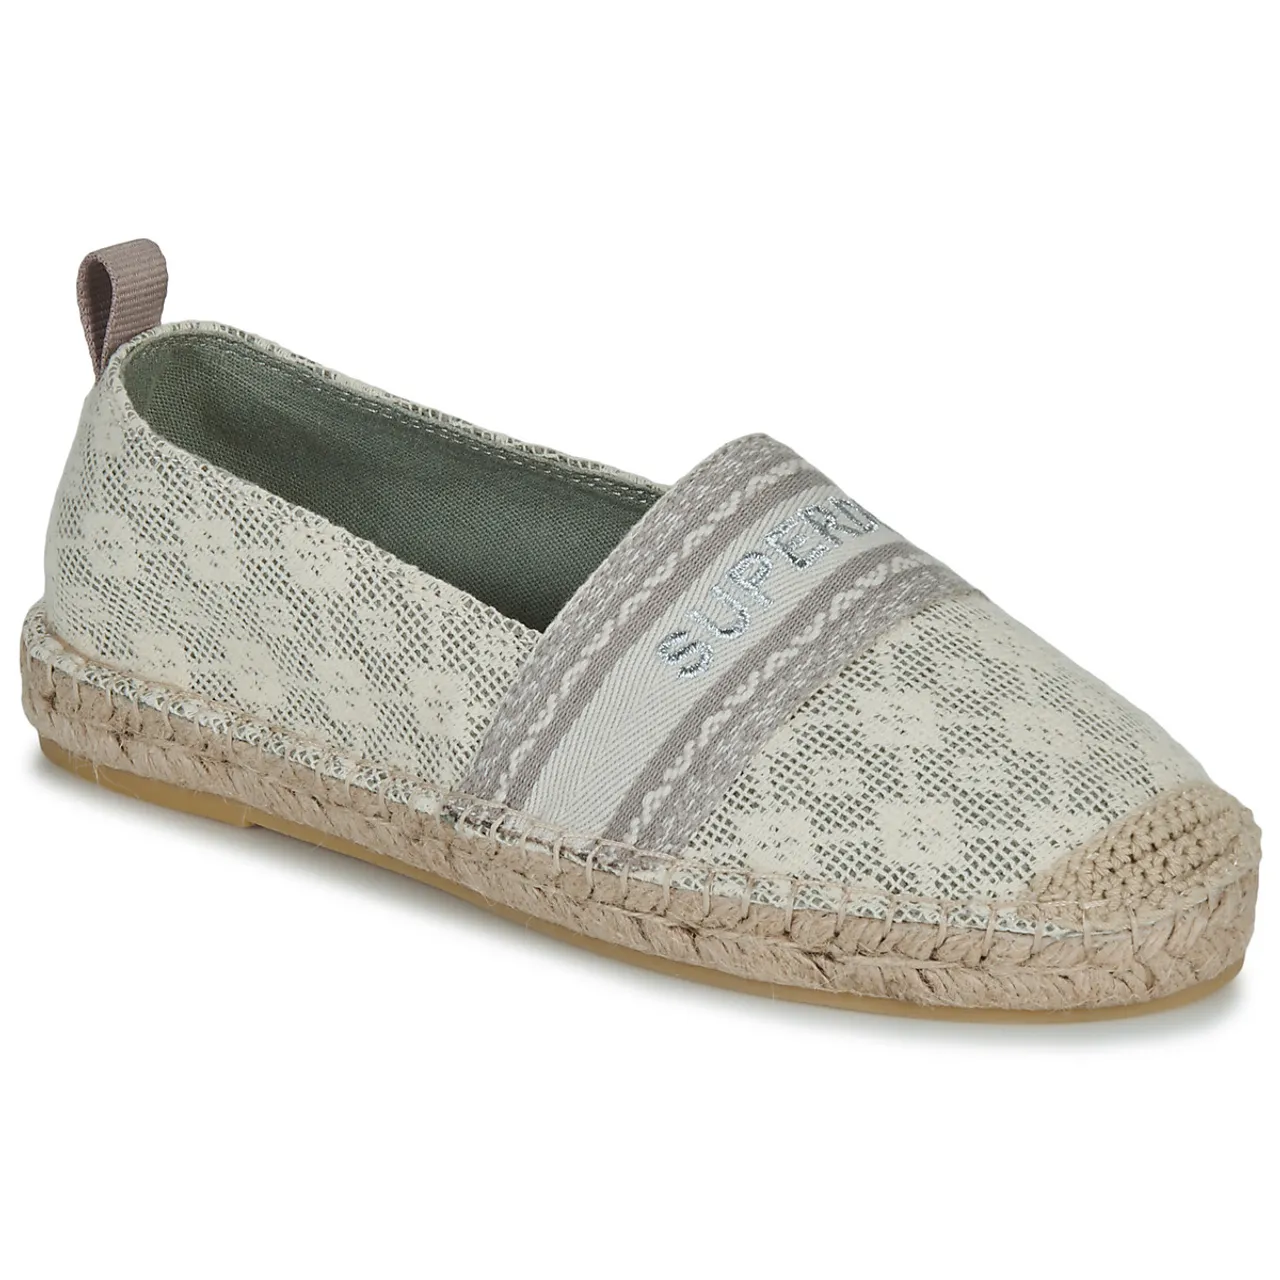 Superdry  Canvas Espadrille Overlay Shoe  women's Espadrilles / Casual Shoes in Beige